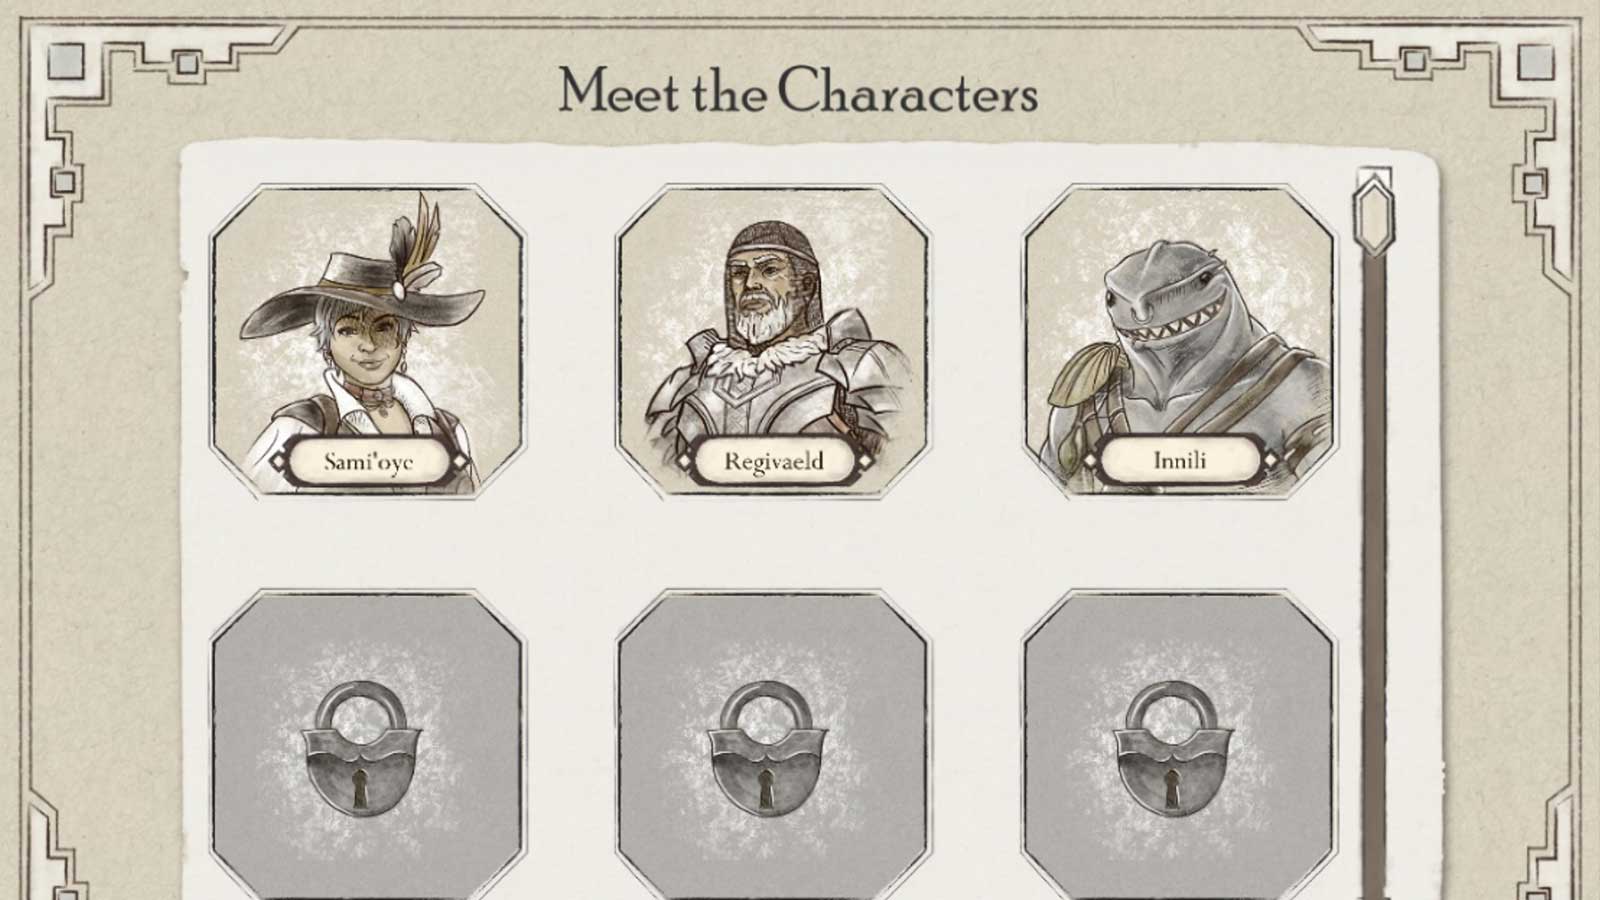 A drawing titled “Meet The Character” displaying icons for three fantasy characters. 